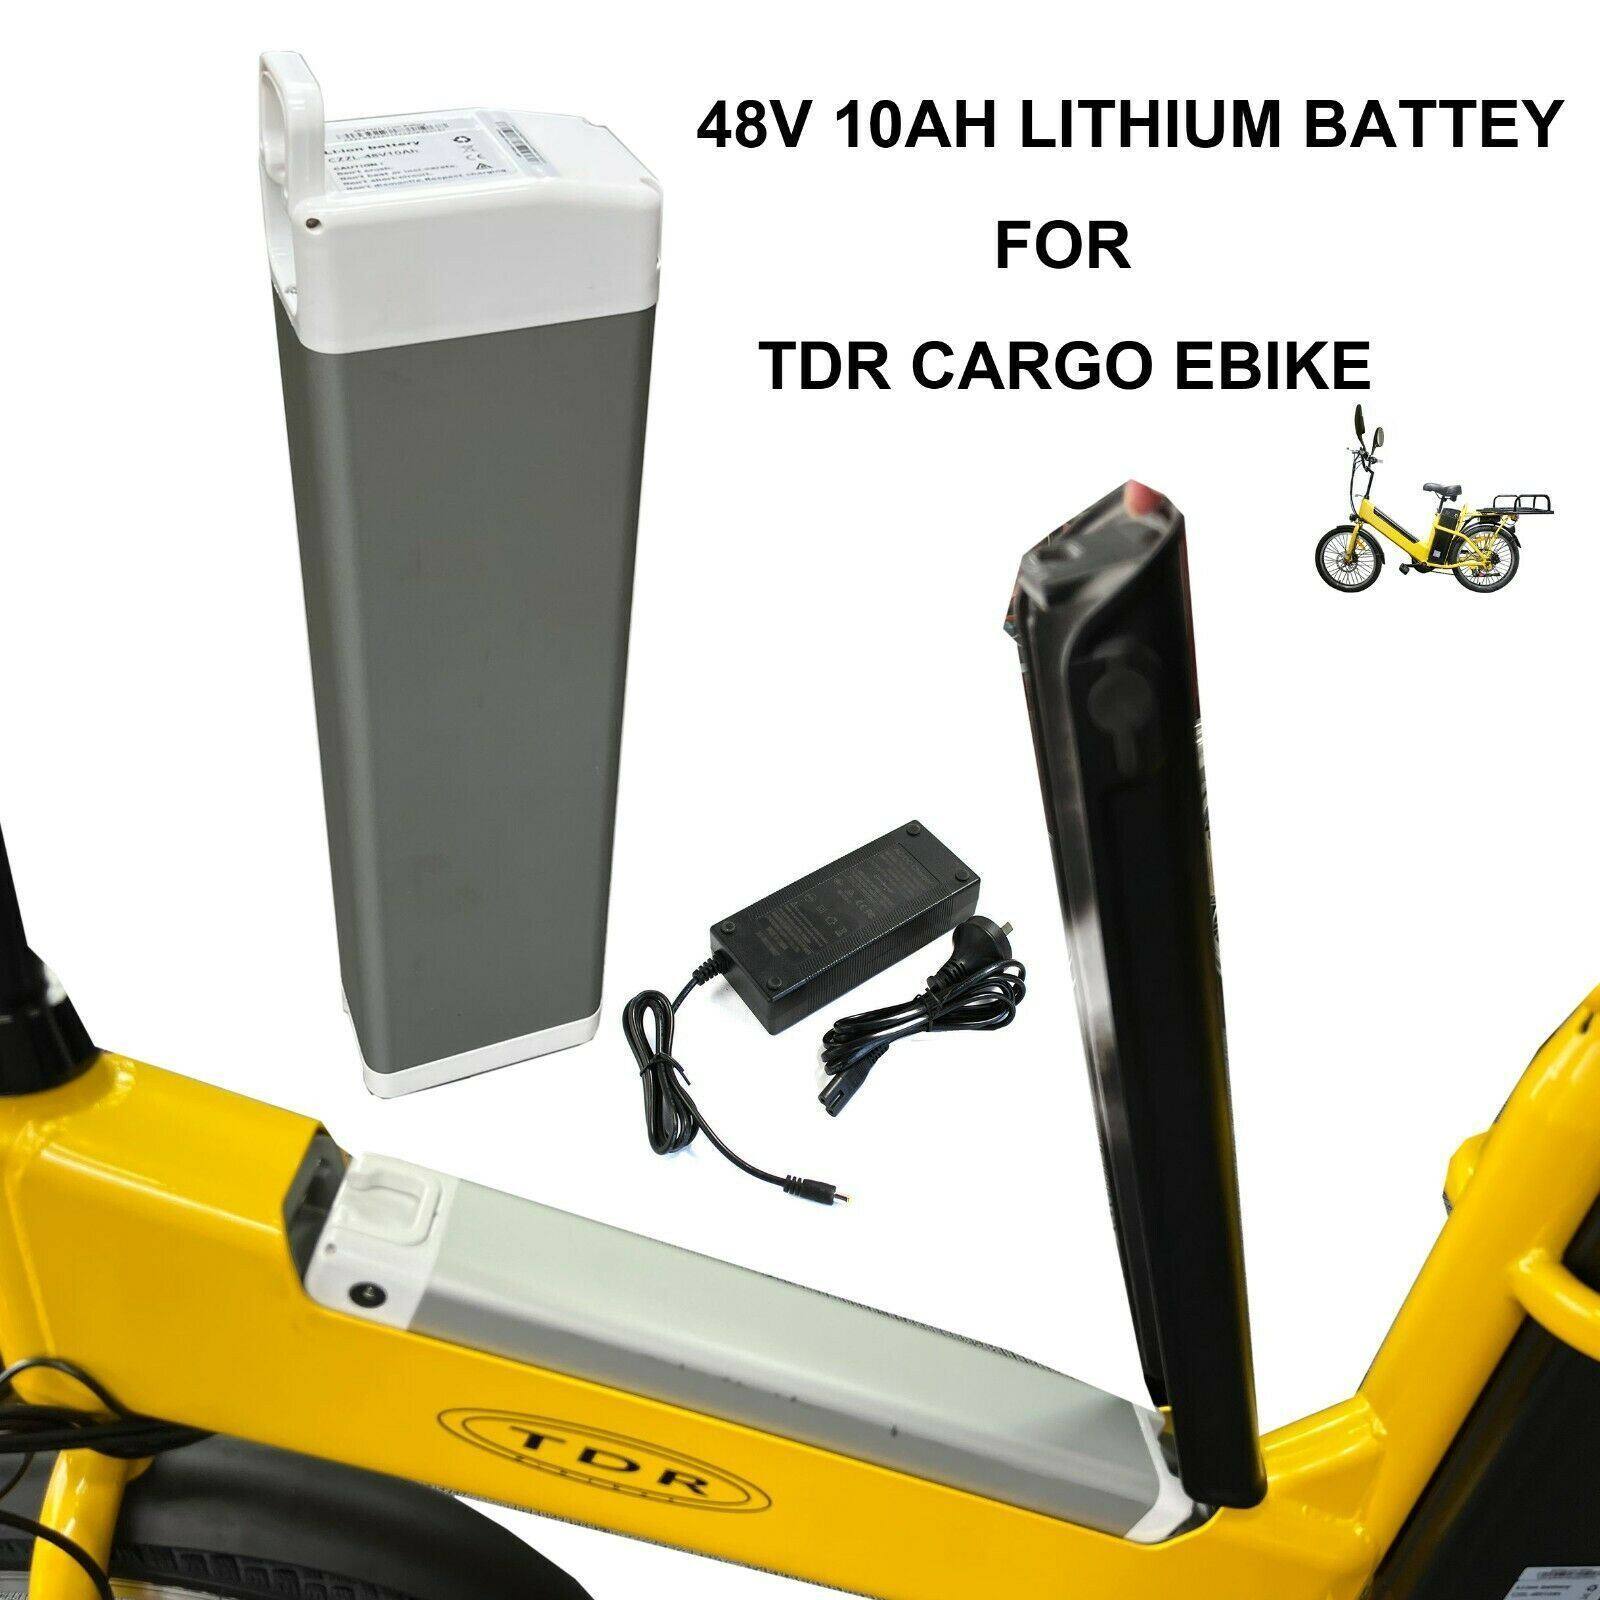 48V 10AH Lithium Battery For TDR Cargo Electric Bike Front Replacement Battery - TDRMOTO